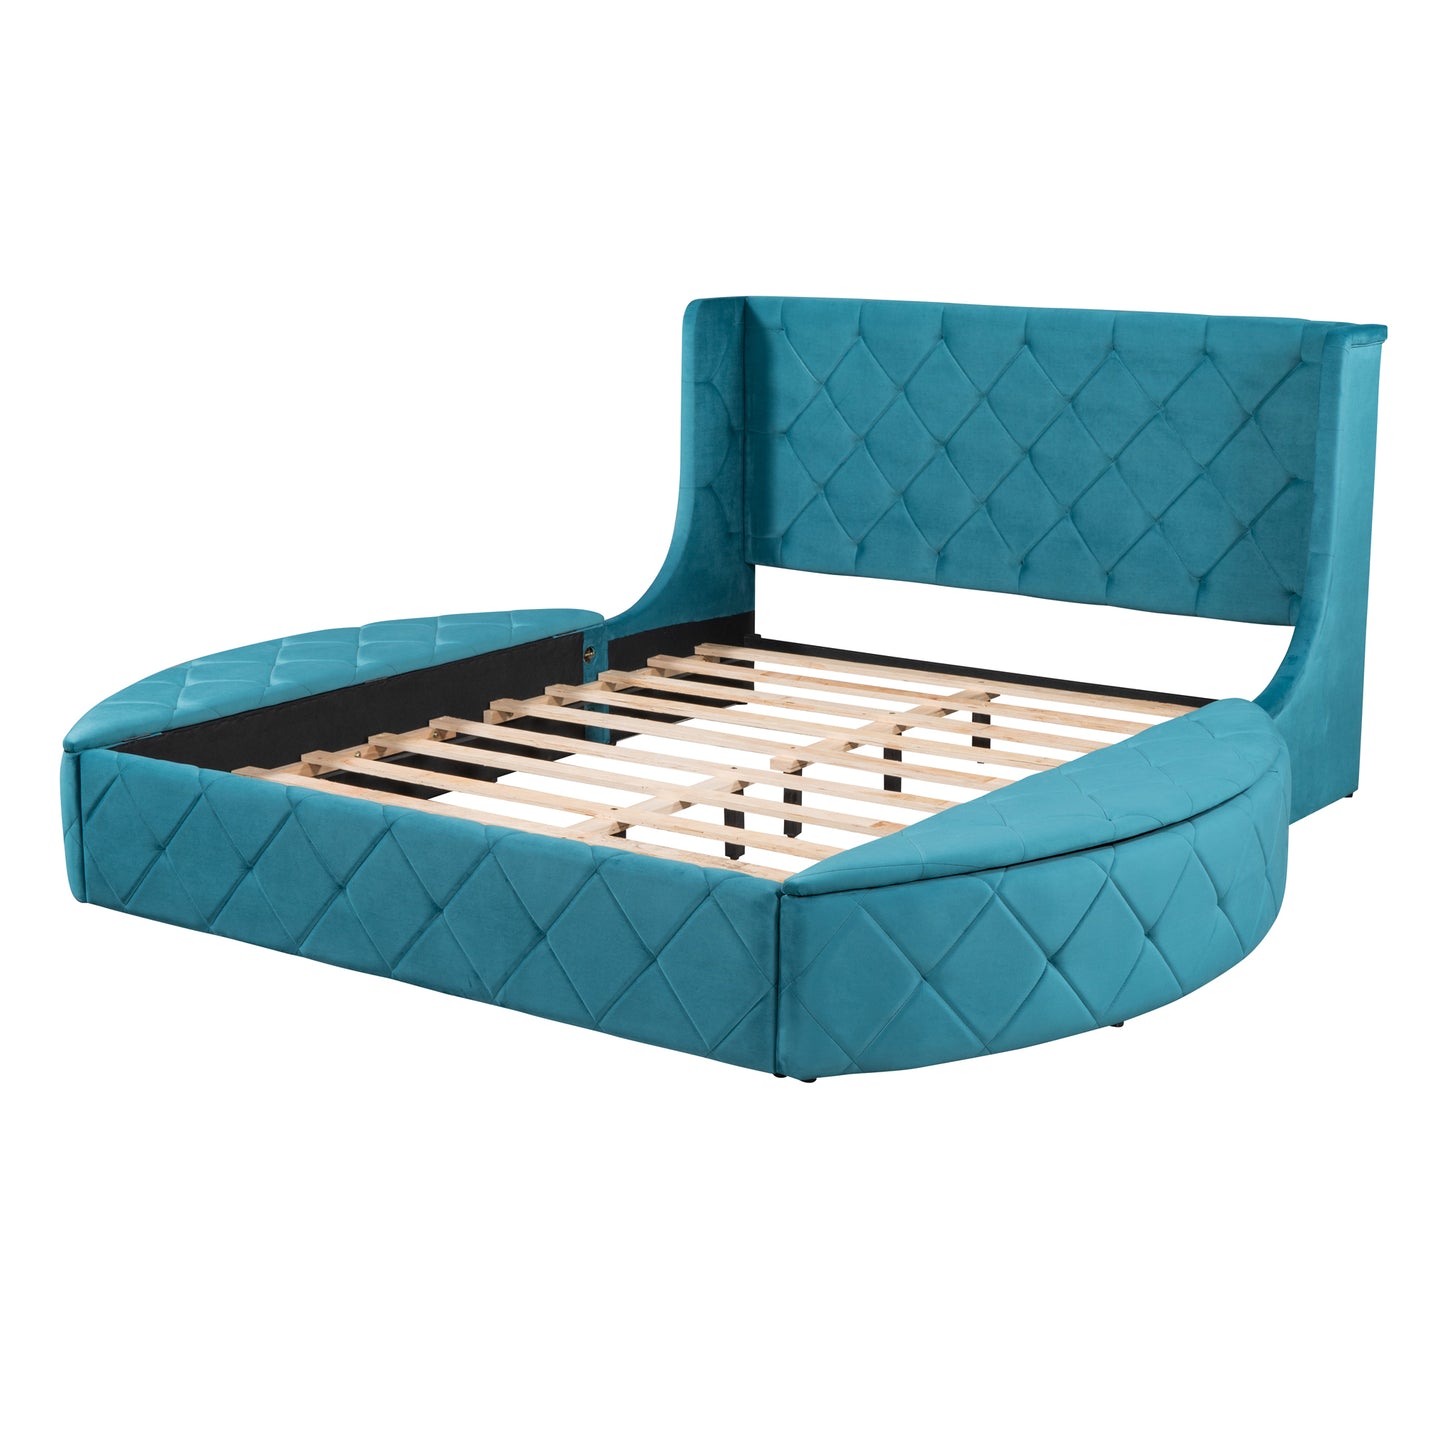 Upholstered Platform Bed Queen Size Storage Velvet Bed with Wingback Headboard and 1 Big Drawer,2 Side Storage Stool(Blue)